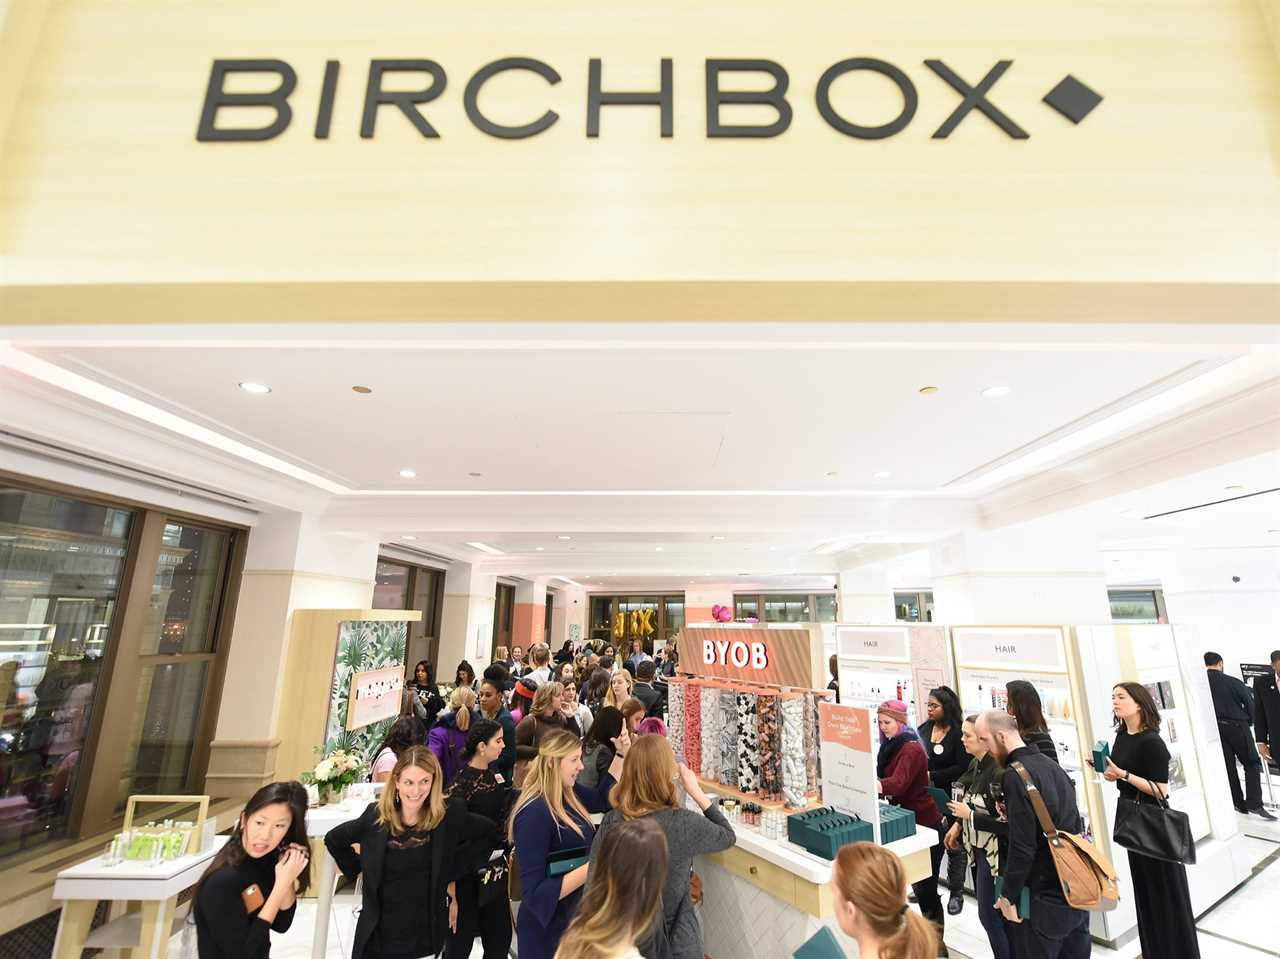 birchbox retail store CHICAGO, IL - DECEMBER 11: Guests celebrate the arrival of the Birchbox retail experience at Walgreens in Chicago (410 N. Michigan Ave.) on December 11, 2018 in Chicago, Illinois. (Photo by Daniel Boczarski/Getty Images for Walgreens)